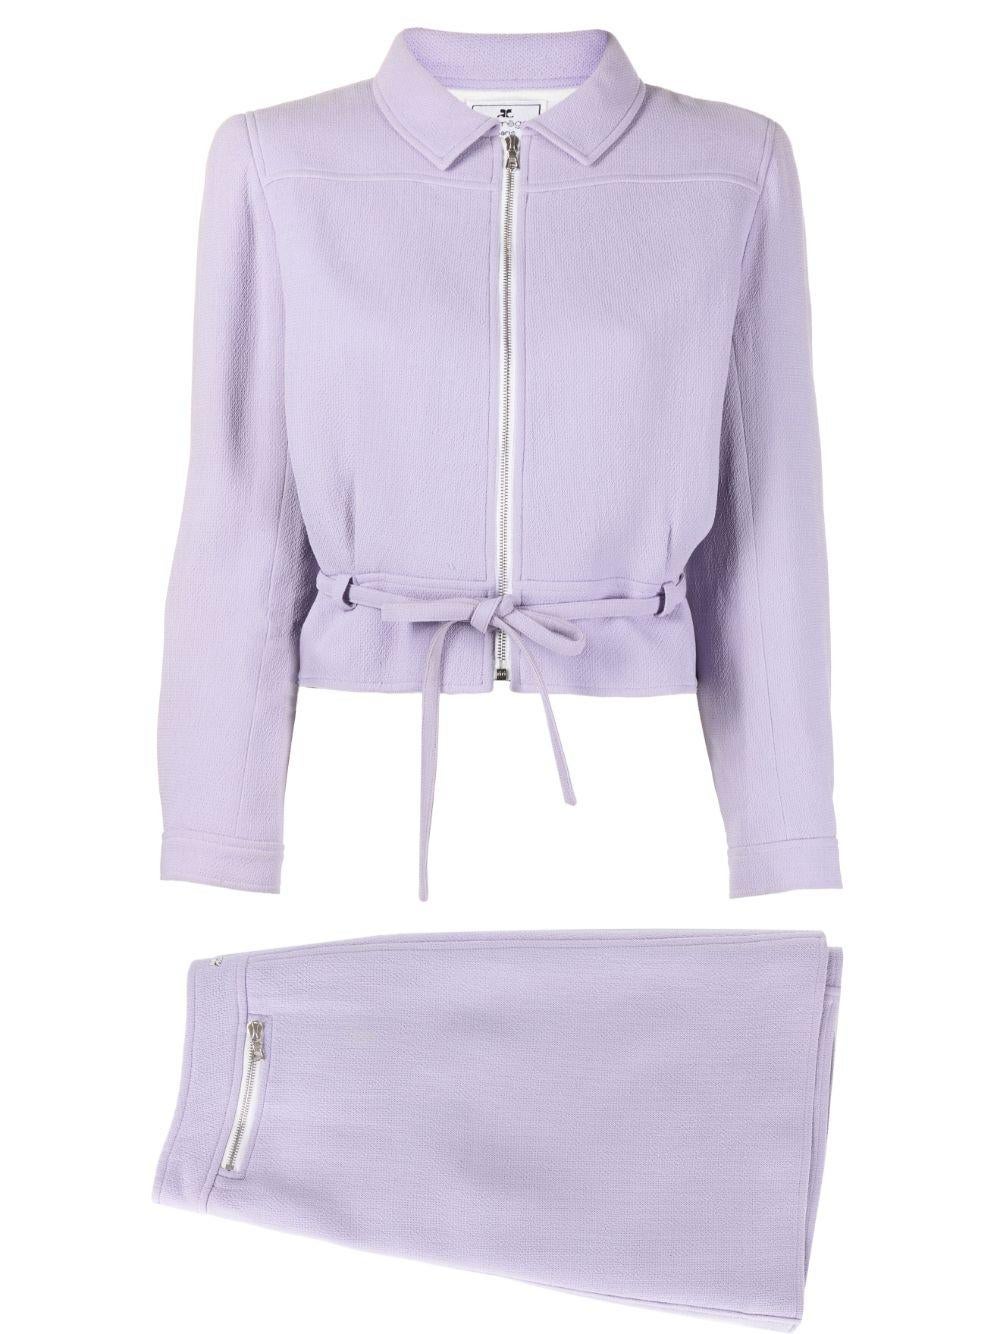 Andre Courreges lilac suit jacket and skirt featuring tie-waist jacket with detachable belt, front zip opening, long sleeves, press-stud fastening cuffs and an ivory lining. 
Skirt featuring a A-line, an above-knee length, a center logo, a front zip